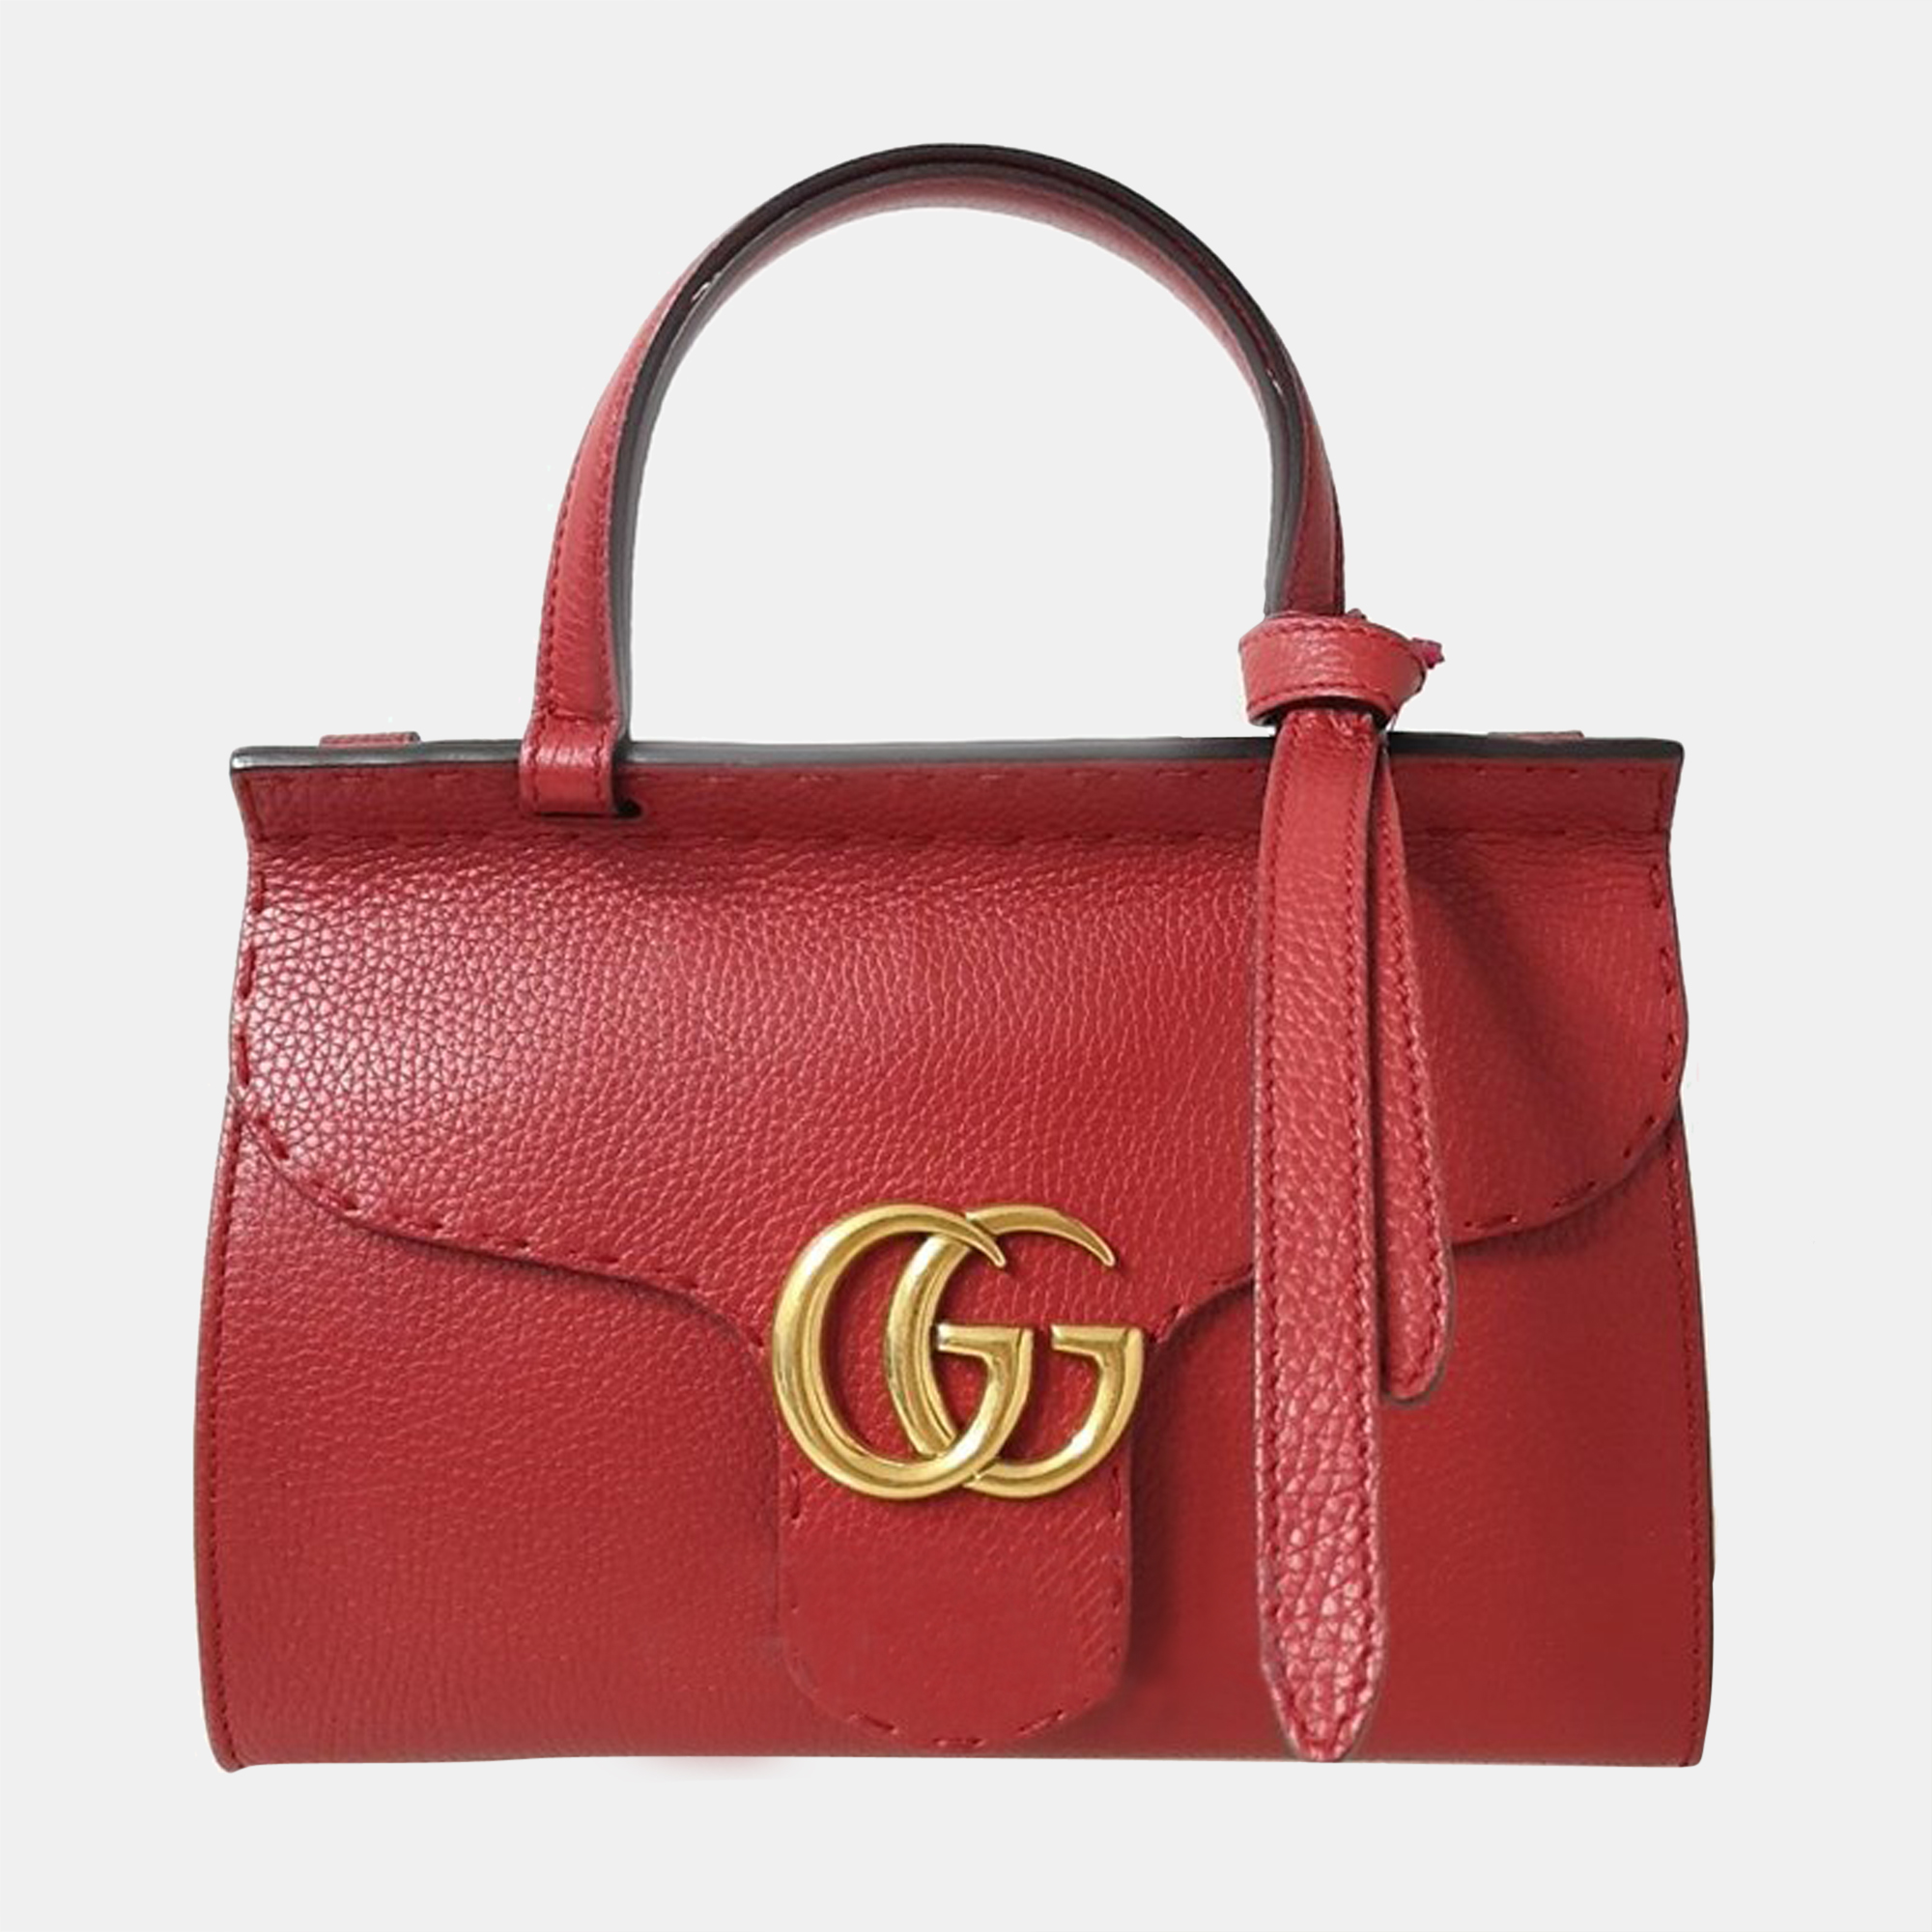 Gucci red leather gg marmont top handle bag